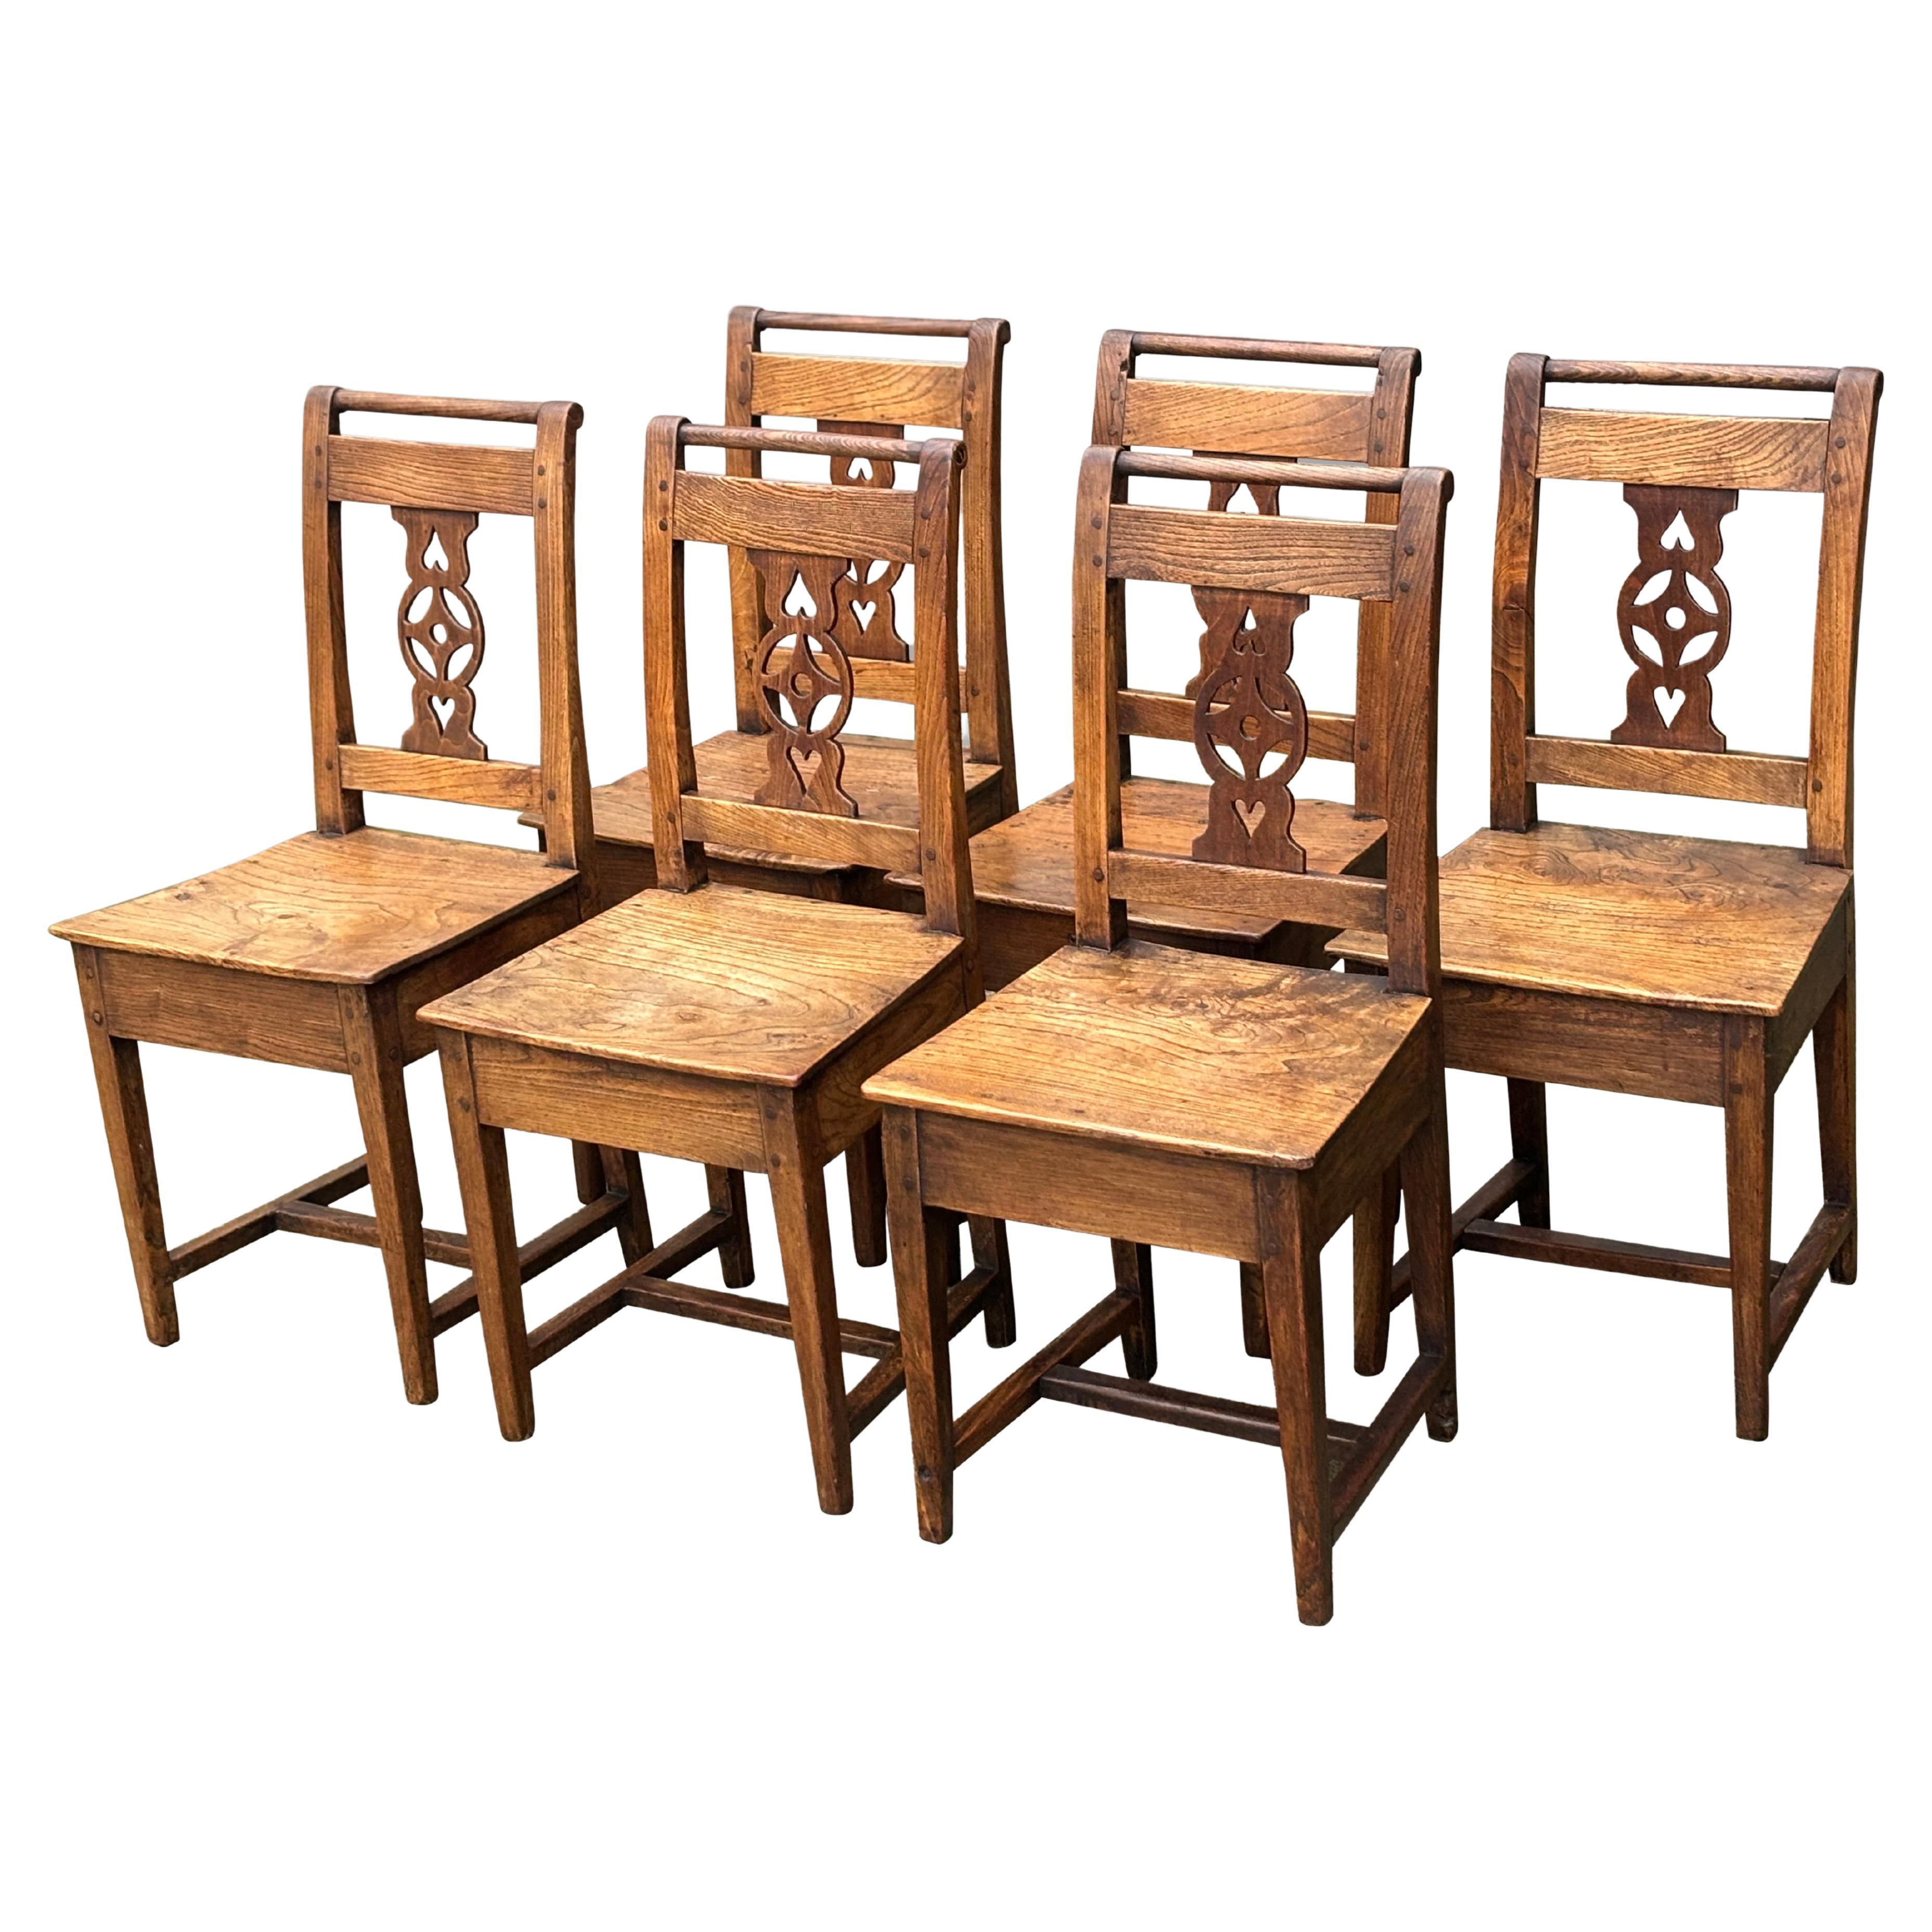 Early 19th Century Set of 6 Yew Wood Farmhouse Kitchen Dining Chairs